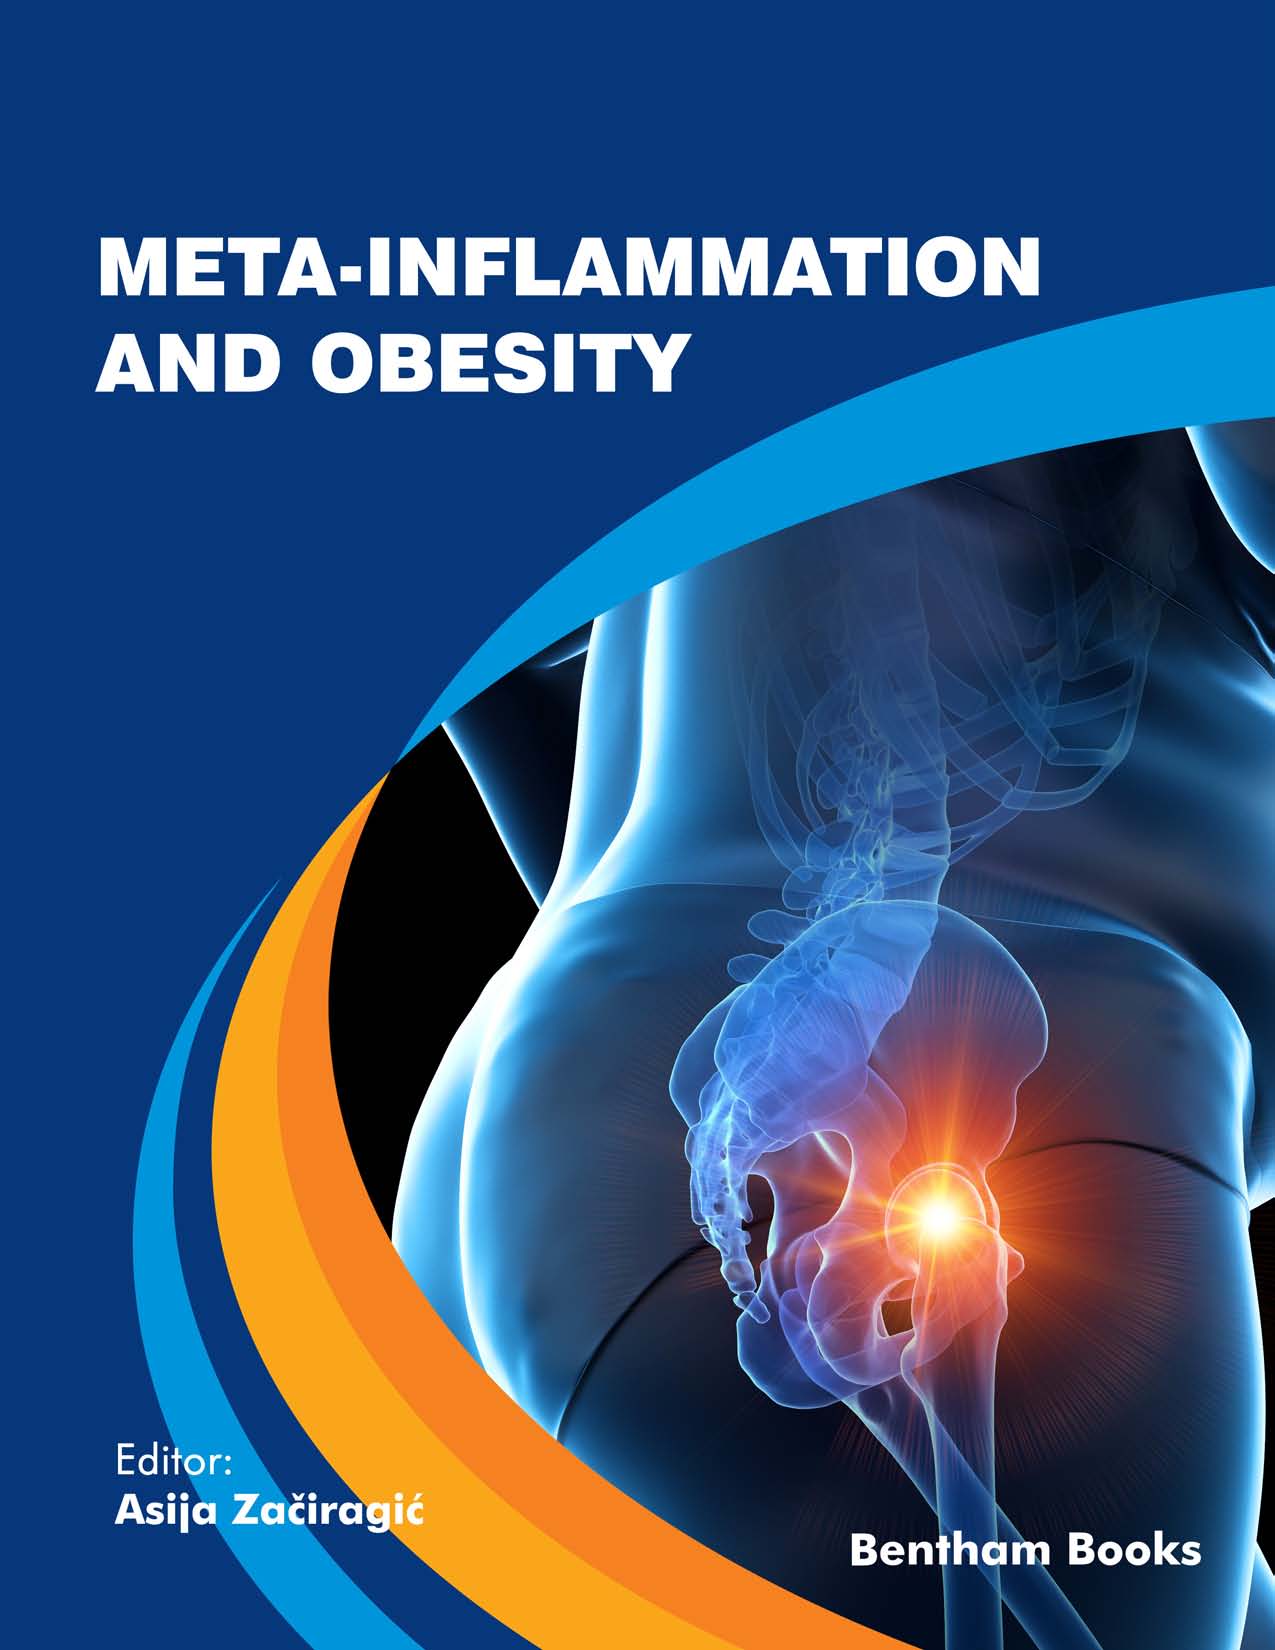 Meta-inflammation and Obesity